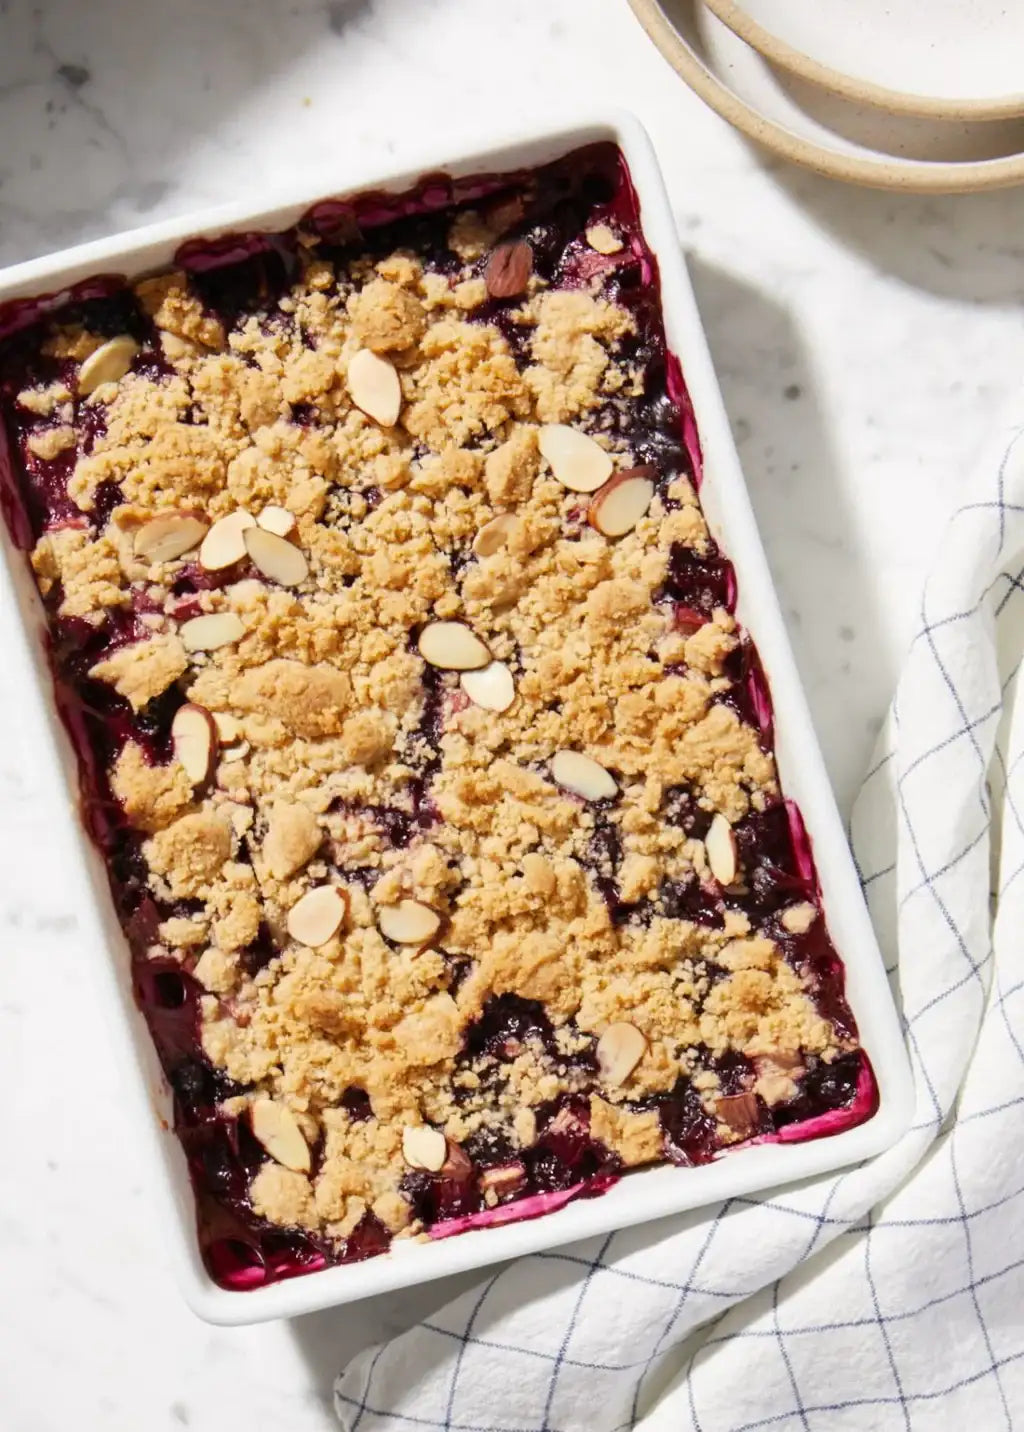 SIBO and IBS friendly blueberry crumble recipe